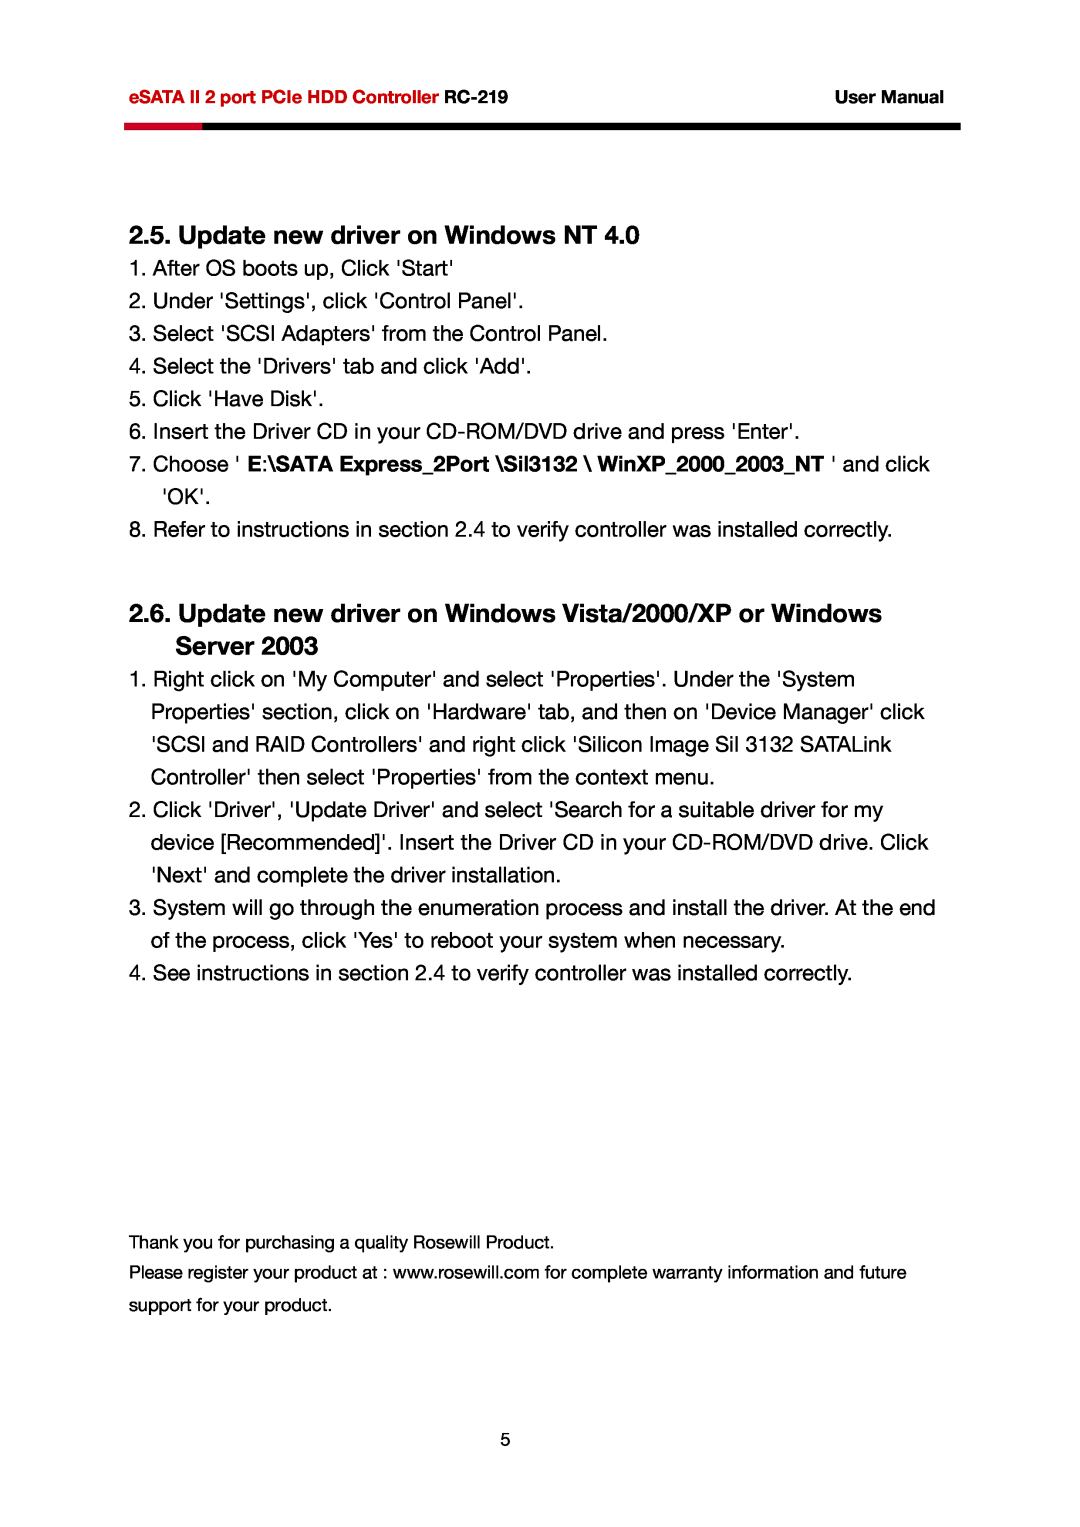 Rosewill RC-219 user manual Update new driver on Windows NT, Update new driver on Windows Vista/2000/XP or Windows Server 